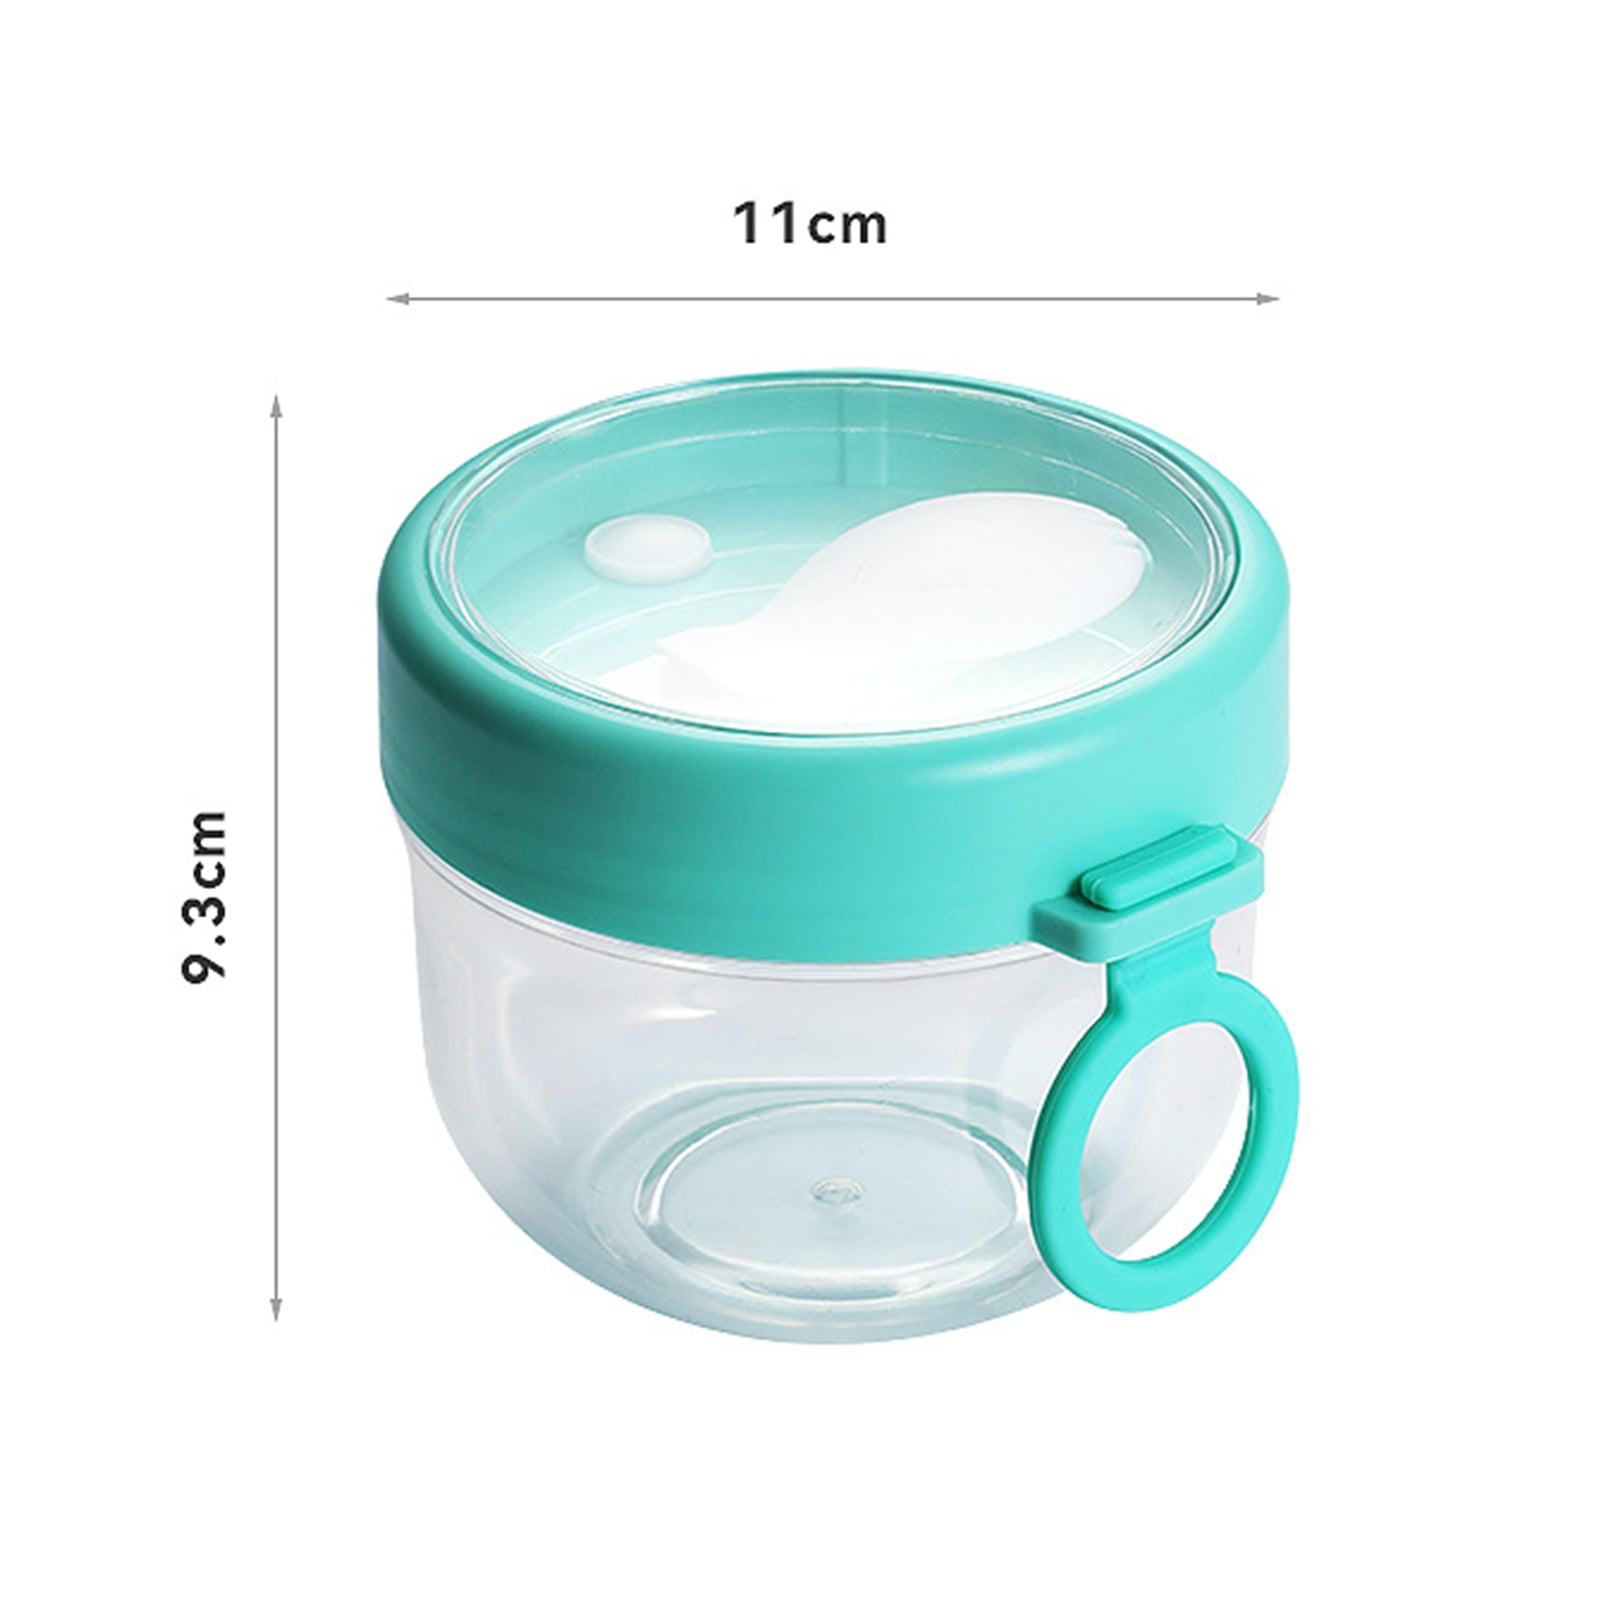  Xunyou Insulated Food Container- Cereal, Yogurt, Oatmeal, Milk,  Granola Storage for Work, School, On-the-Go Breakfast- Keep Warm & Cold -  Portable, Leak-Proof & BPA Free (Blue): Home & Kitchen